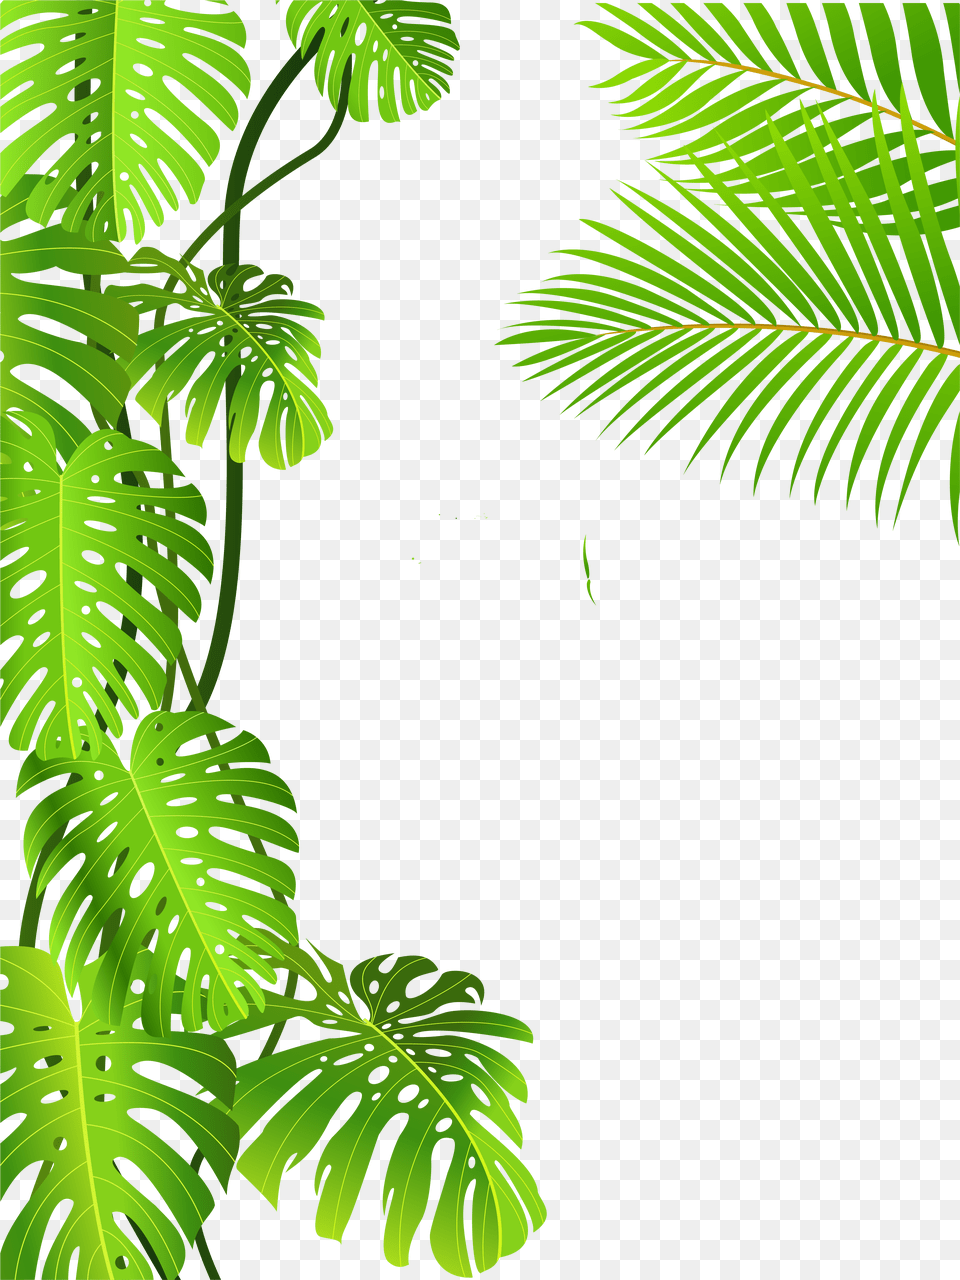 Image Freeuse Royalty Clip Art Forest Royaltyfree Tropical Rainforest Tropical Leaves, Vegetation, Tree, Plant, Outdoors Free Png